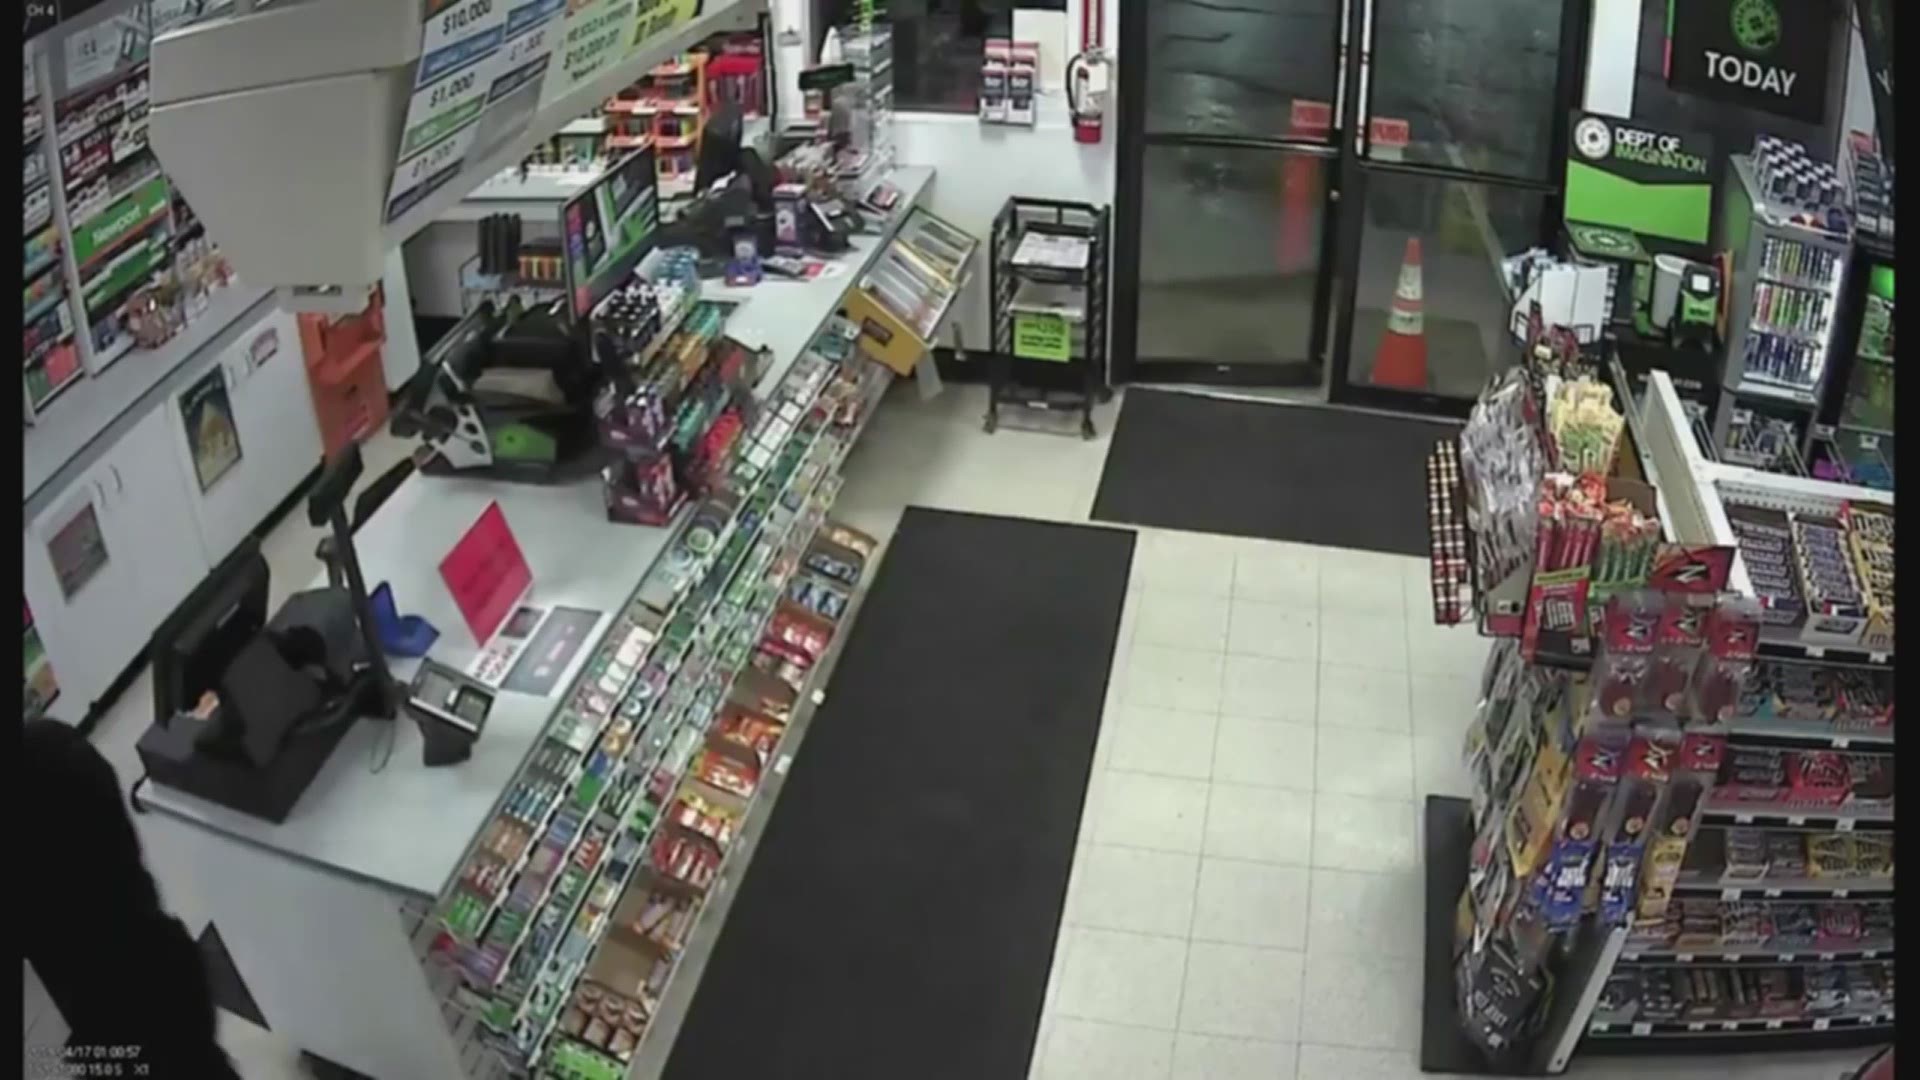 Surveillance video shows an armed robbery at a Union 76 gas station in Pierce County.